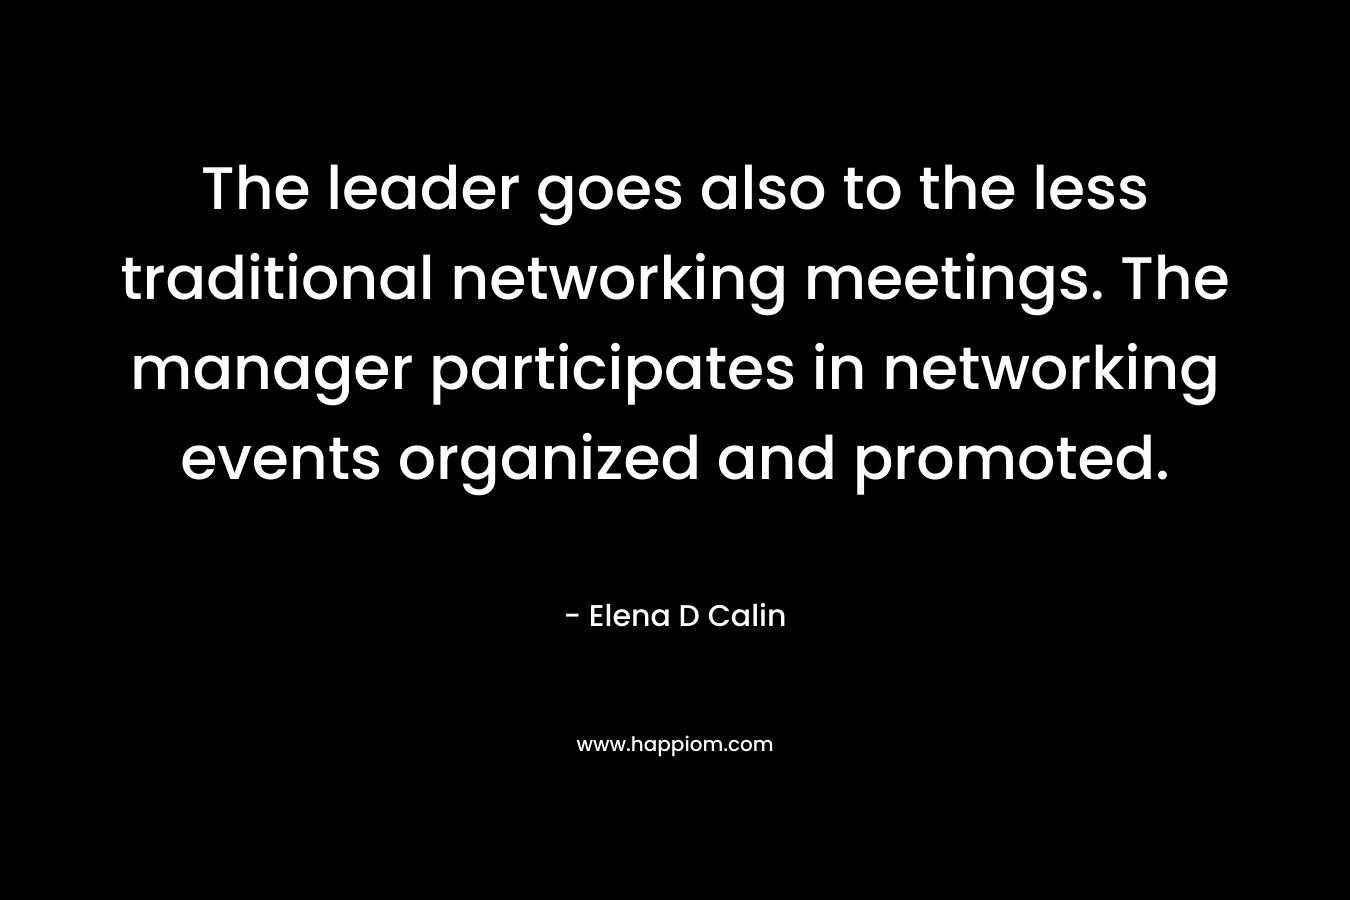 The leader goes also to the less traditional networking meetings. The manager participates in networking events organized and promoted. – Elena D Calin